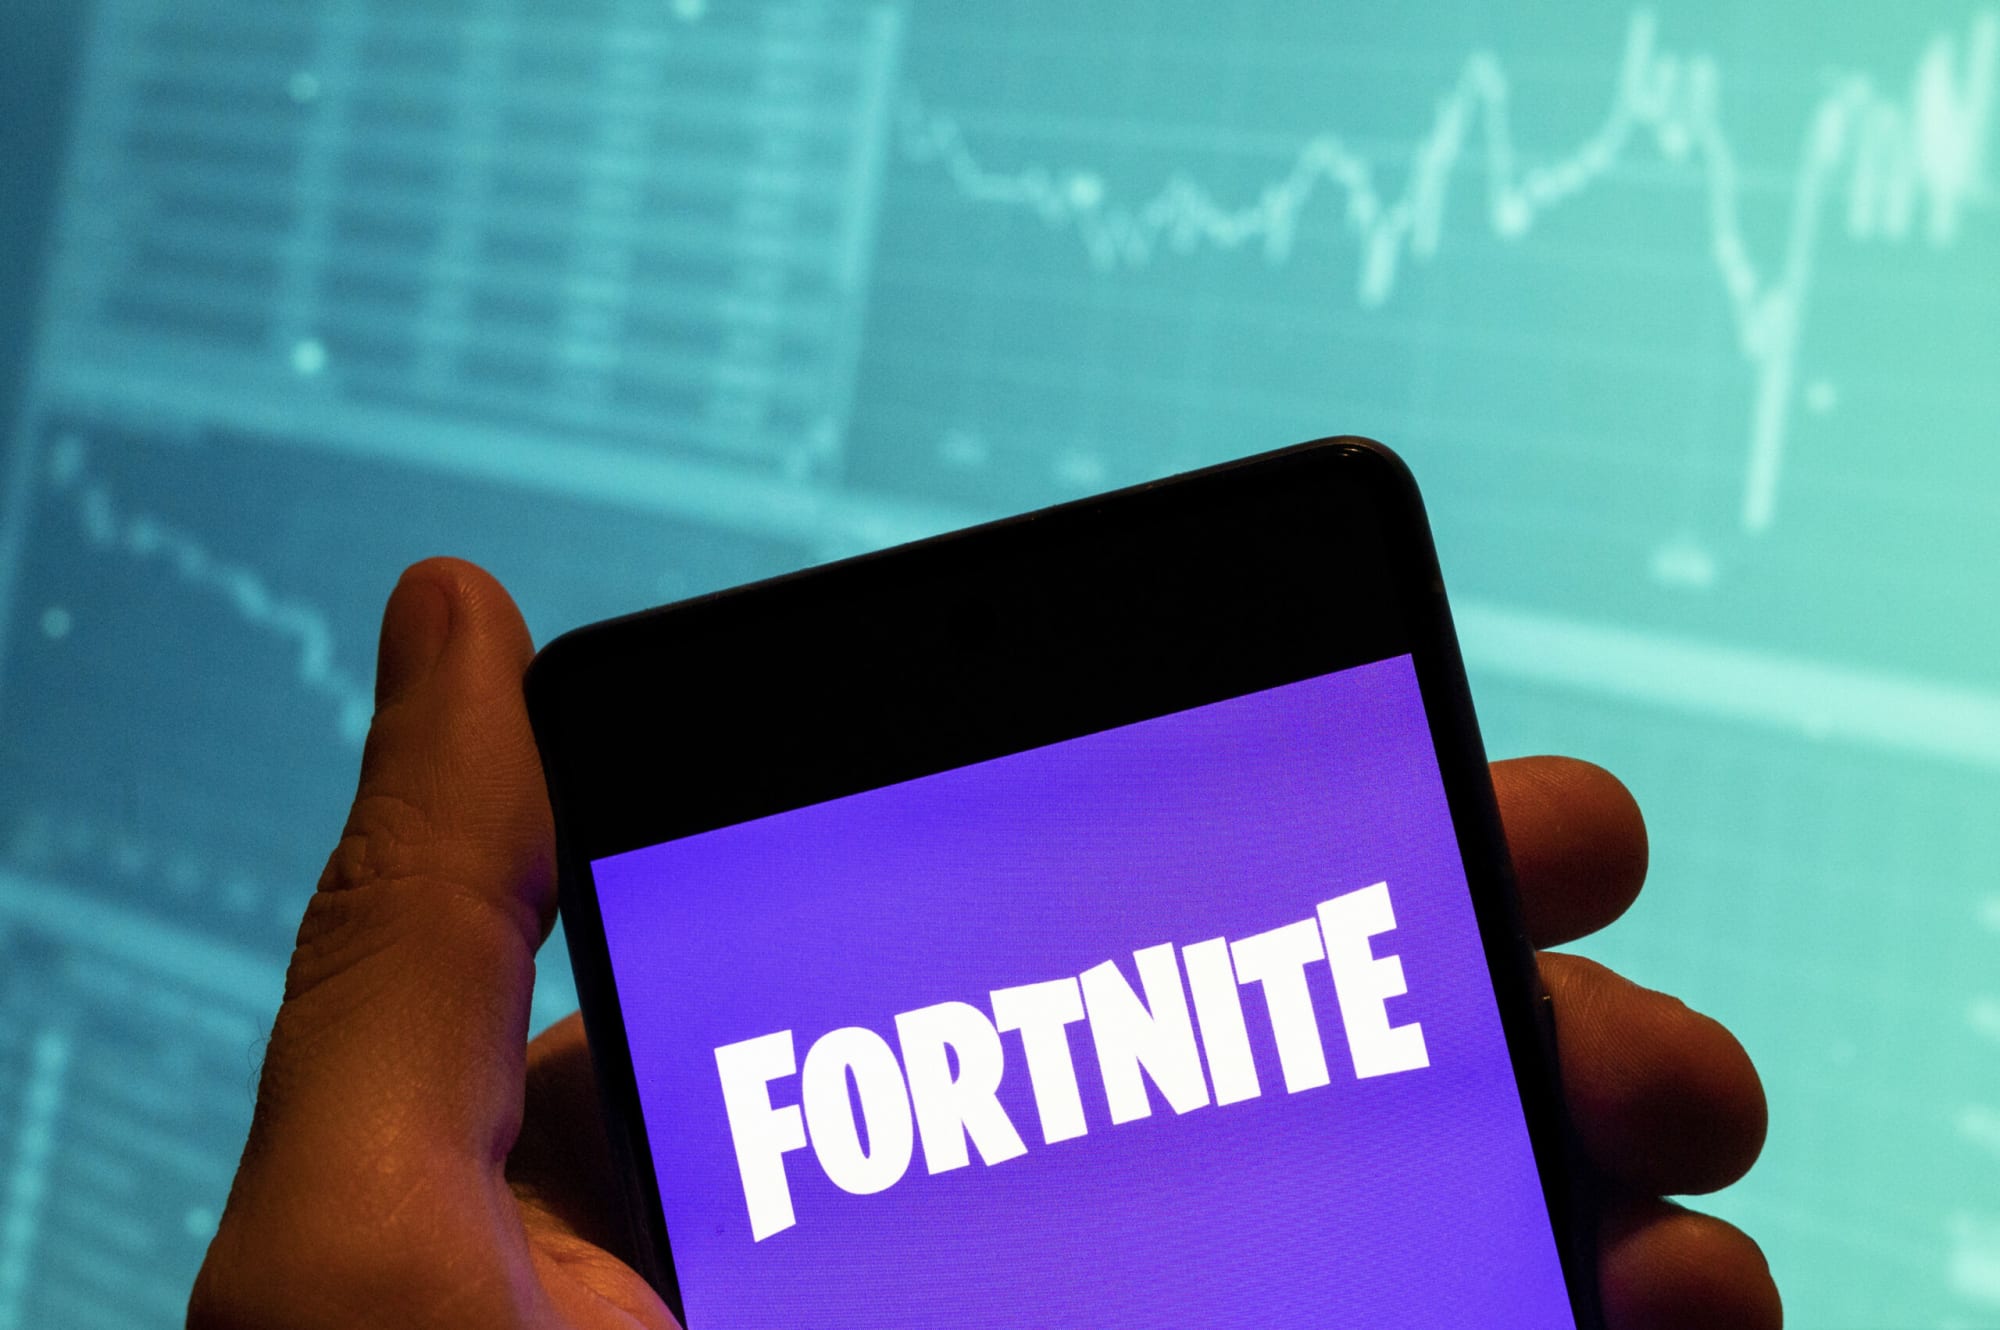 What We Know About Fortnite's New Ranked Mode - Esports Illustrated